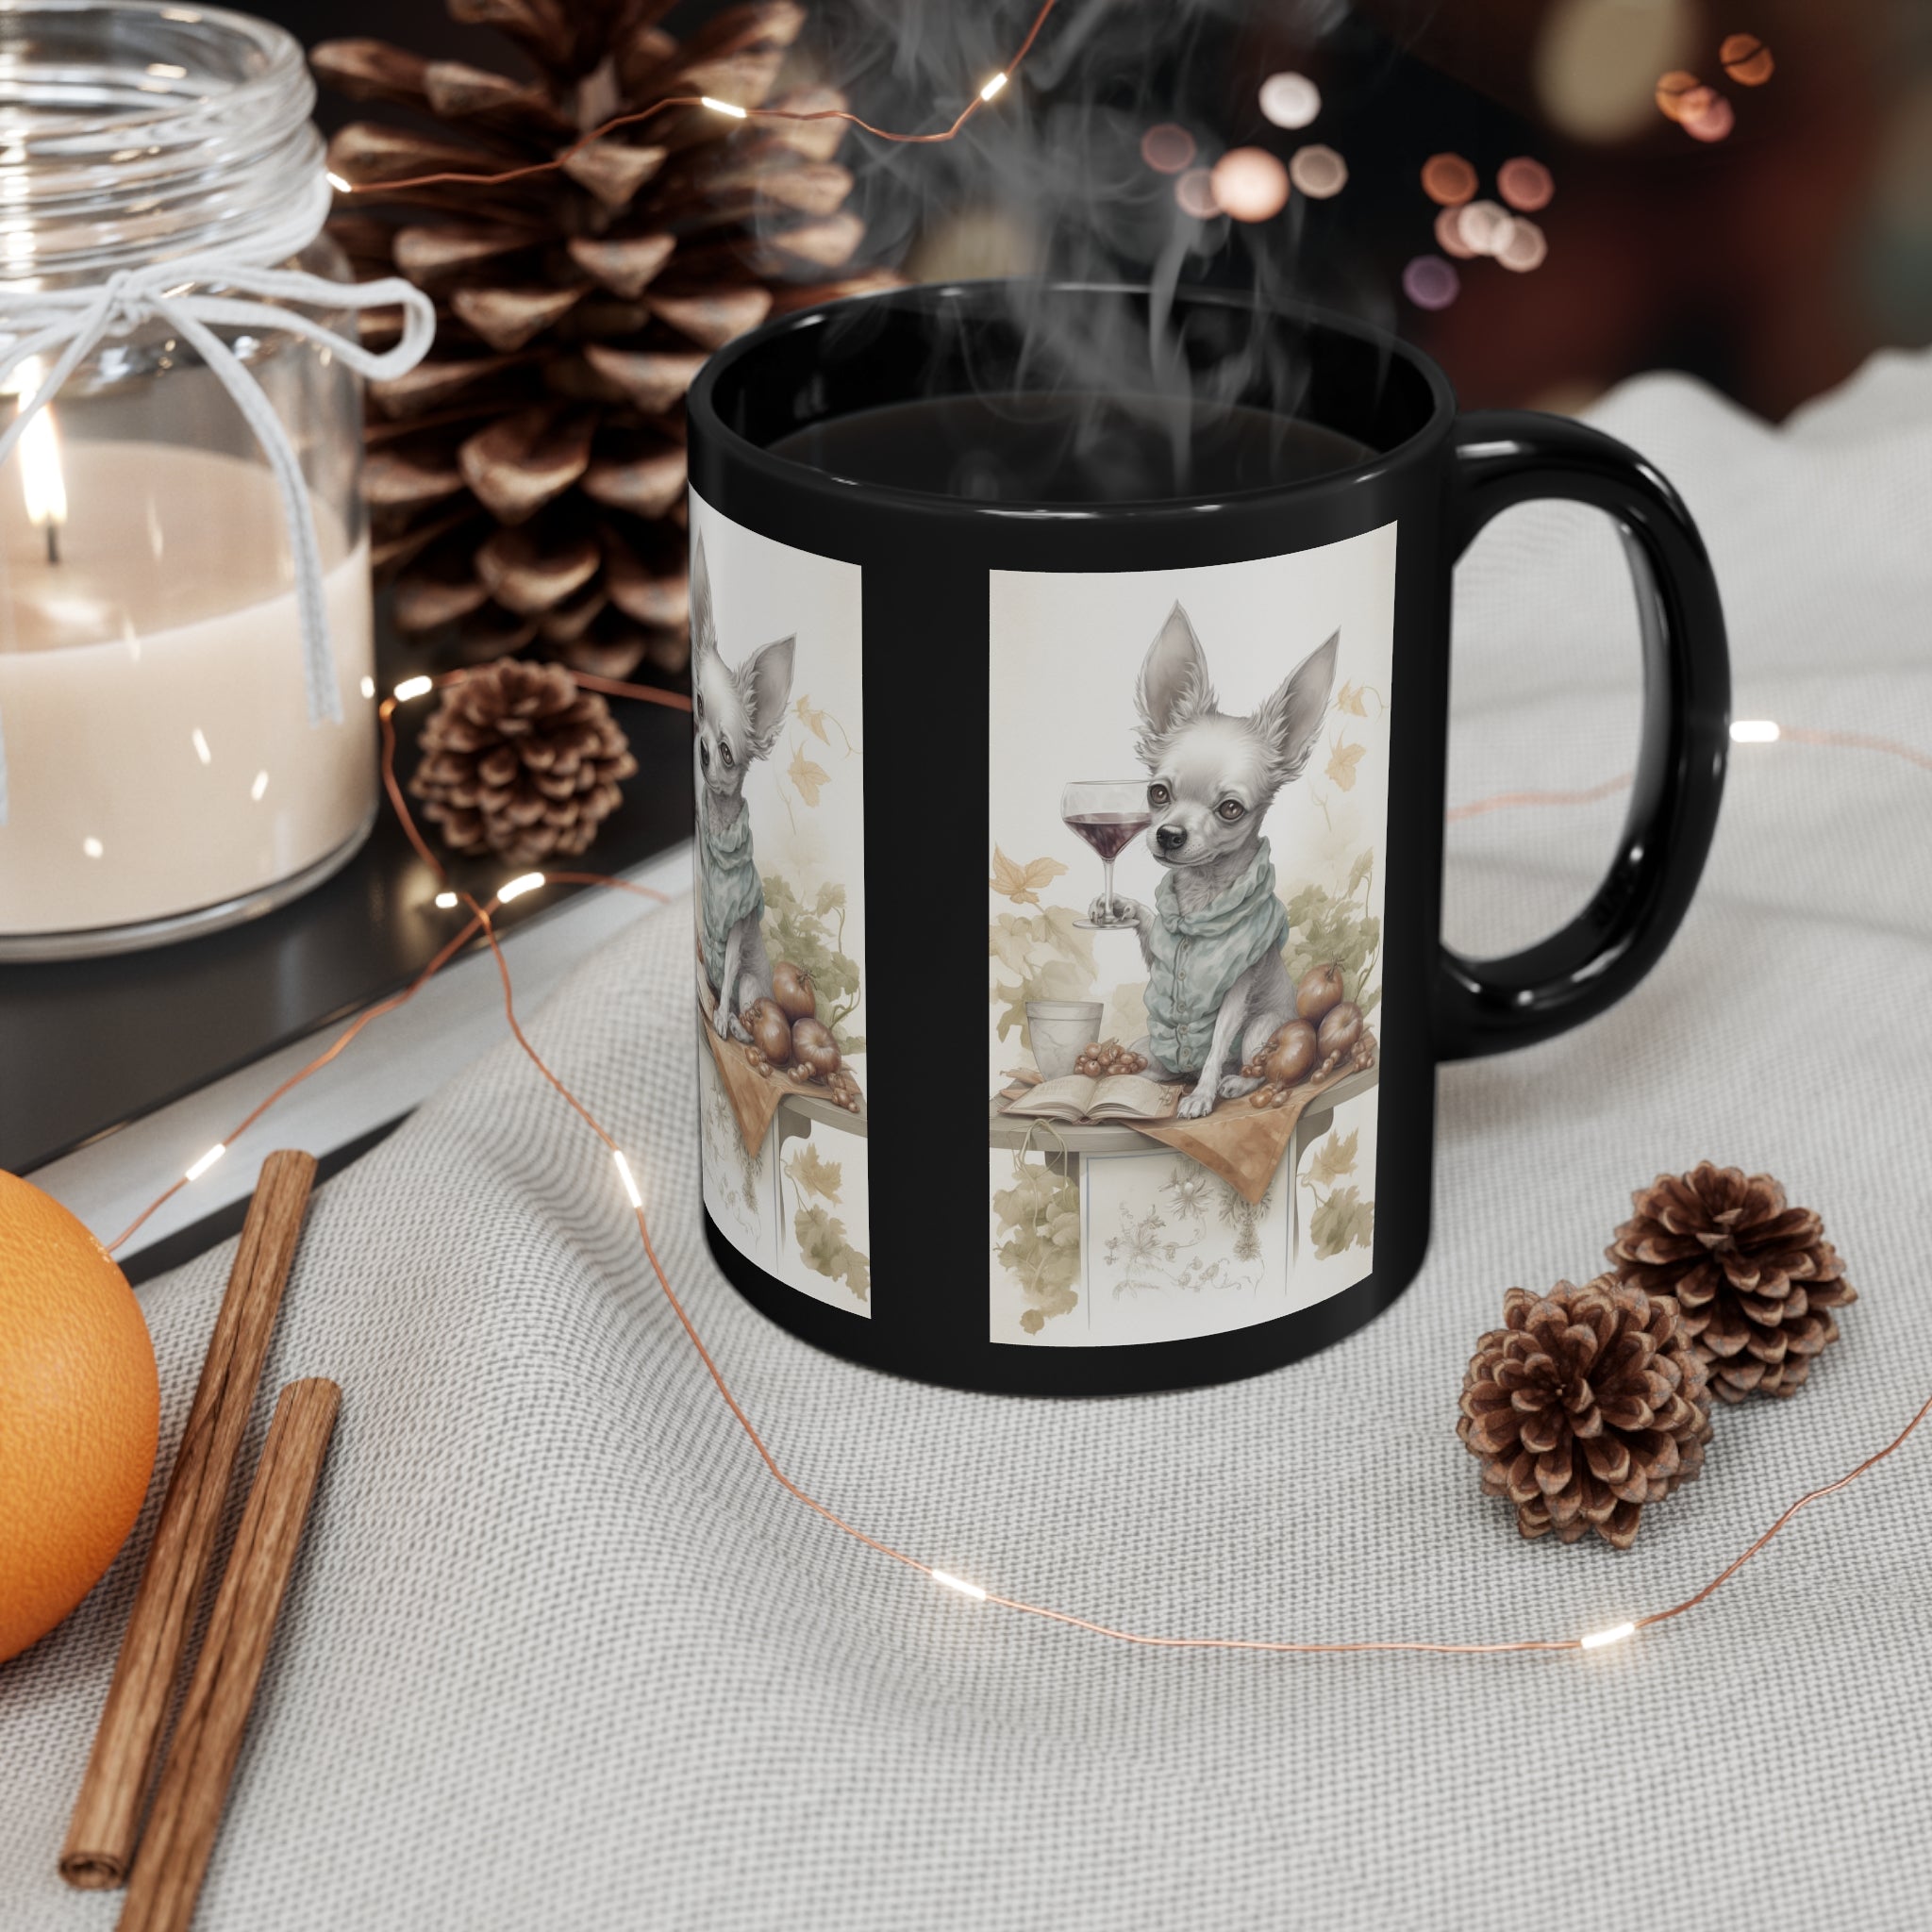 🍷 Wine Serving Chihuahua 11oz Black Mug - Whimsical Dog Lover's Coffee Cup | Adorable Chihuahua Bartender for Wine Enthusiasts